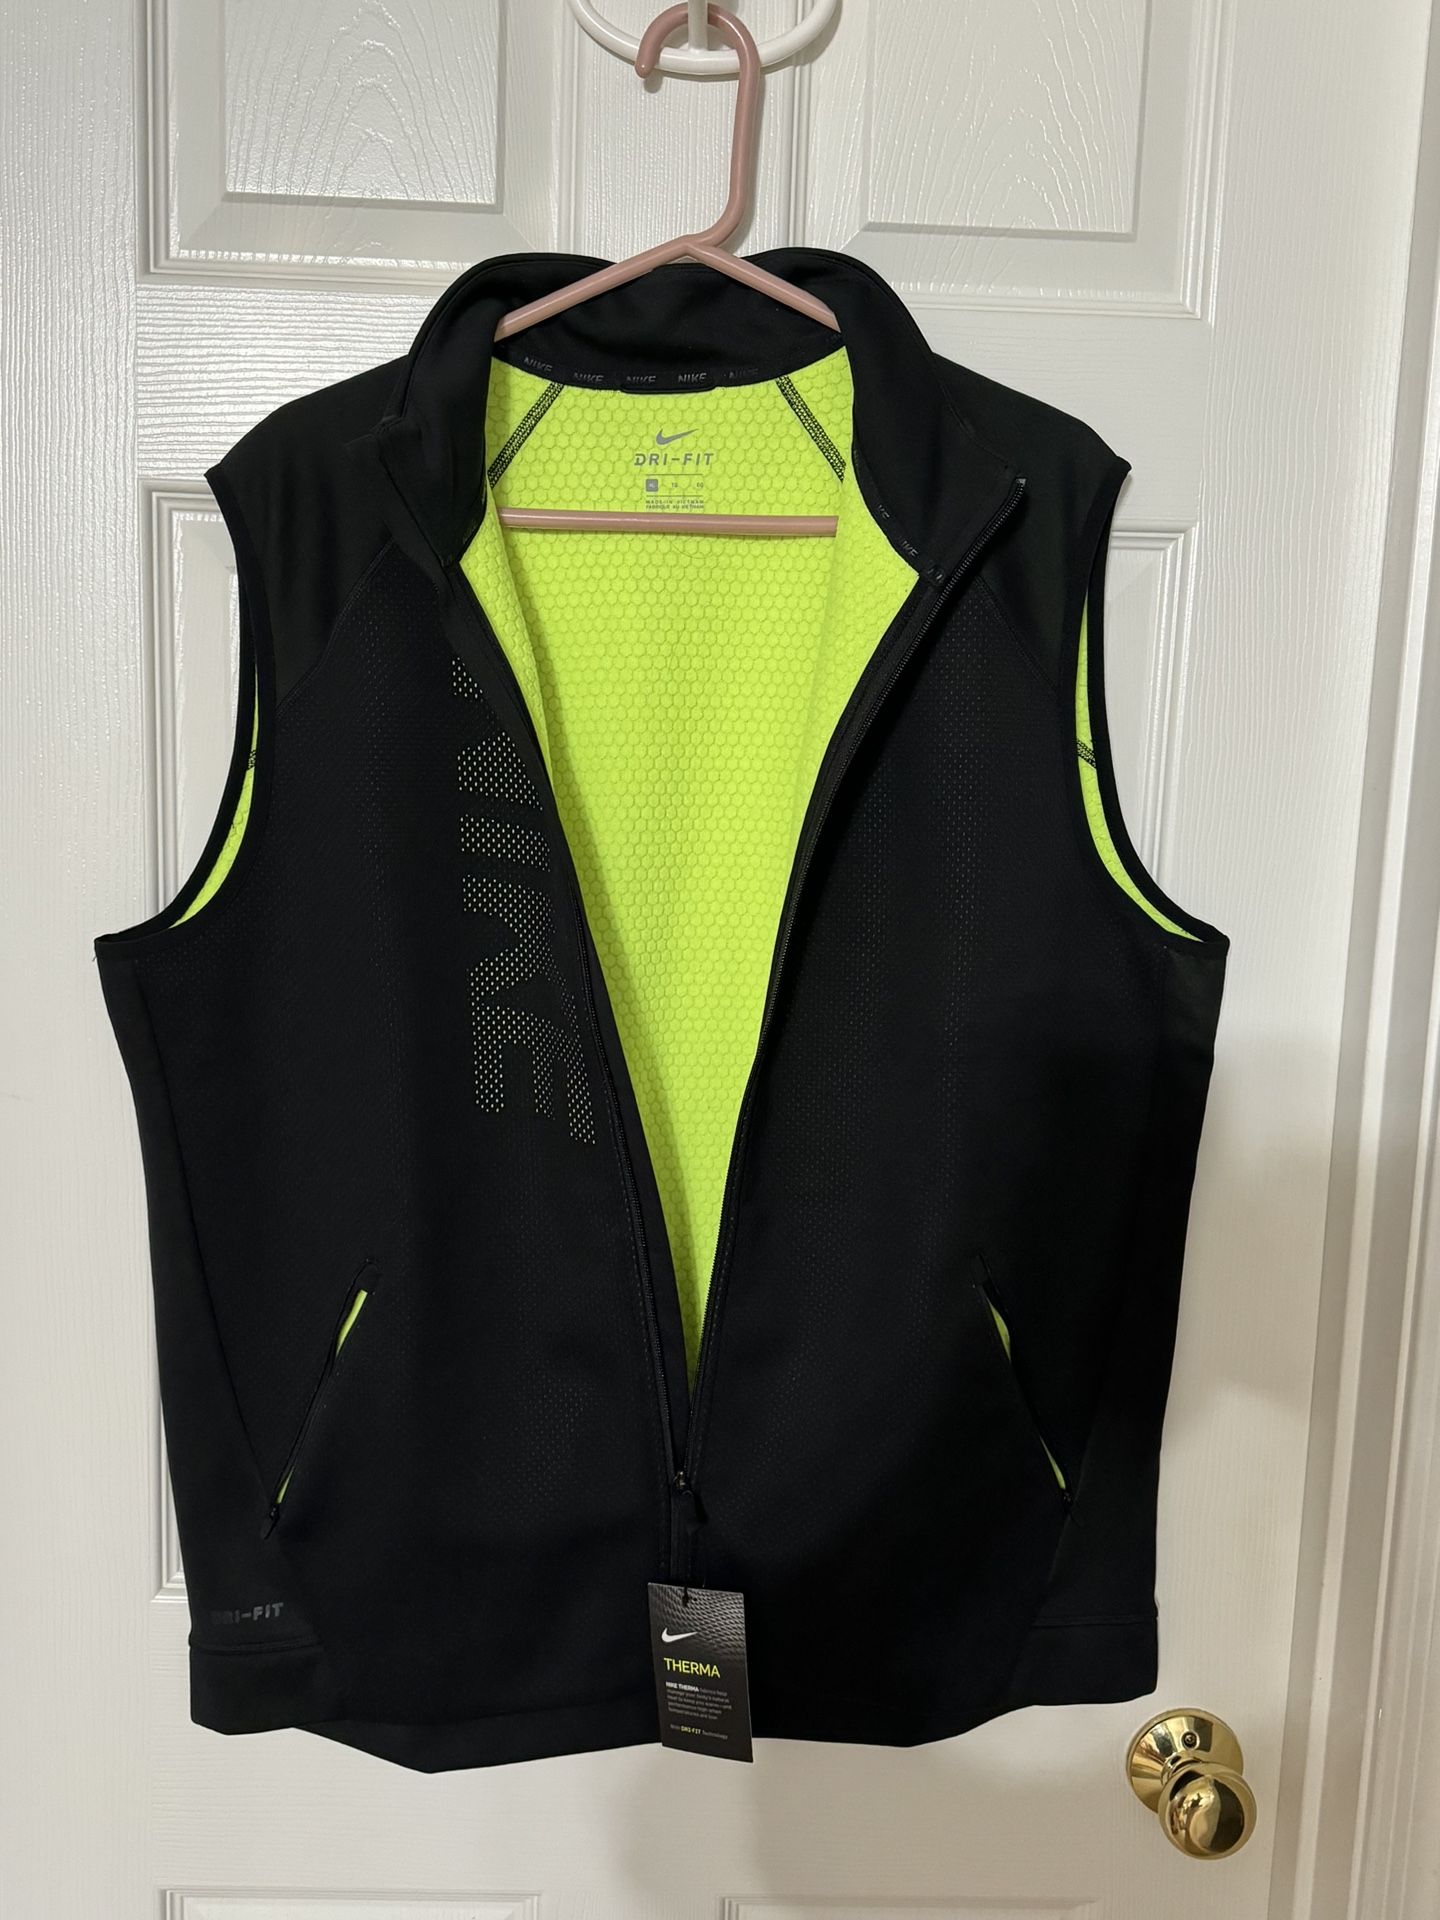 New Nike Men’s Therma Vest Size Extra Large 